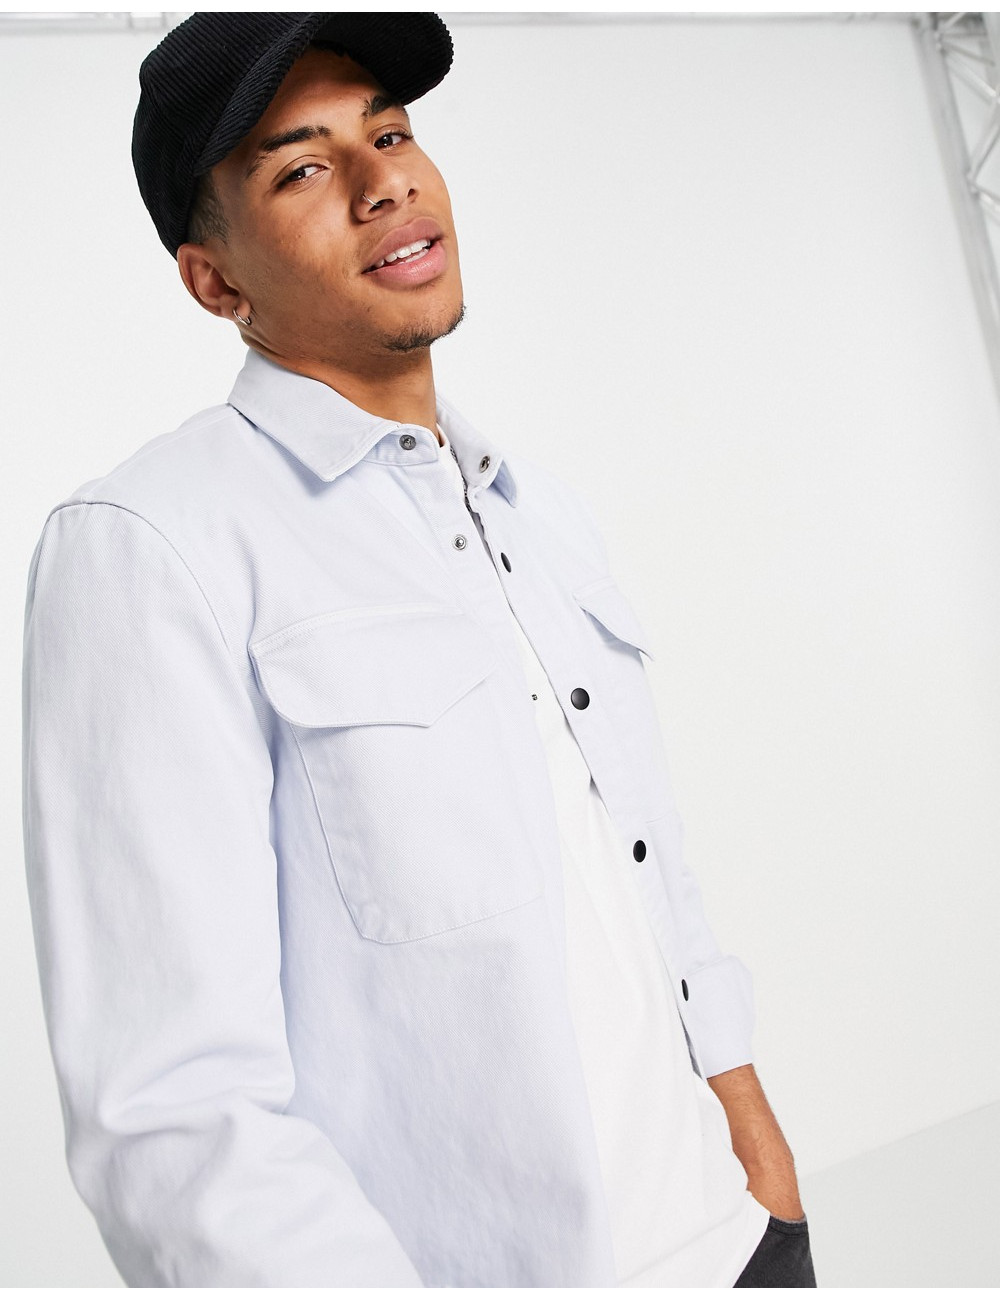 River Island overshirt in blue